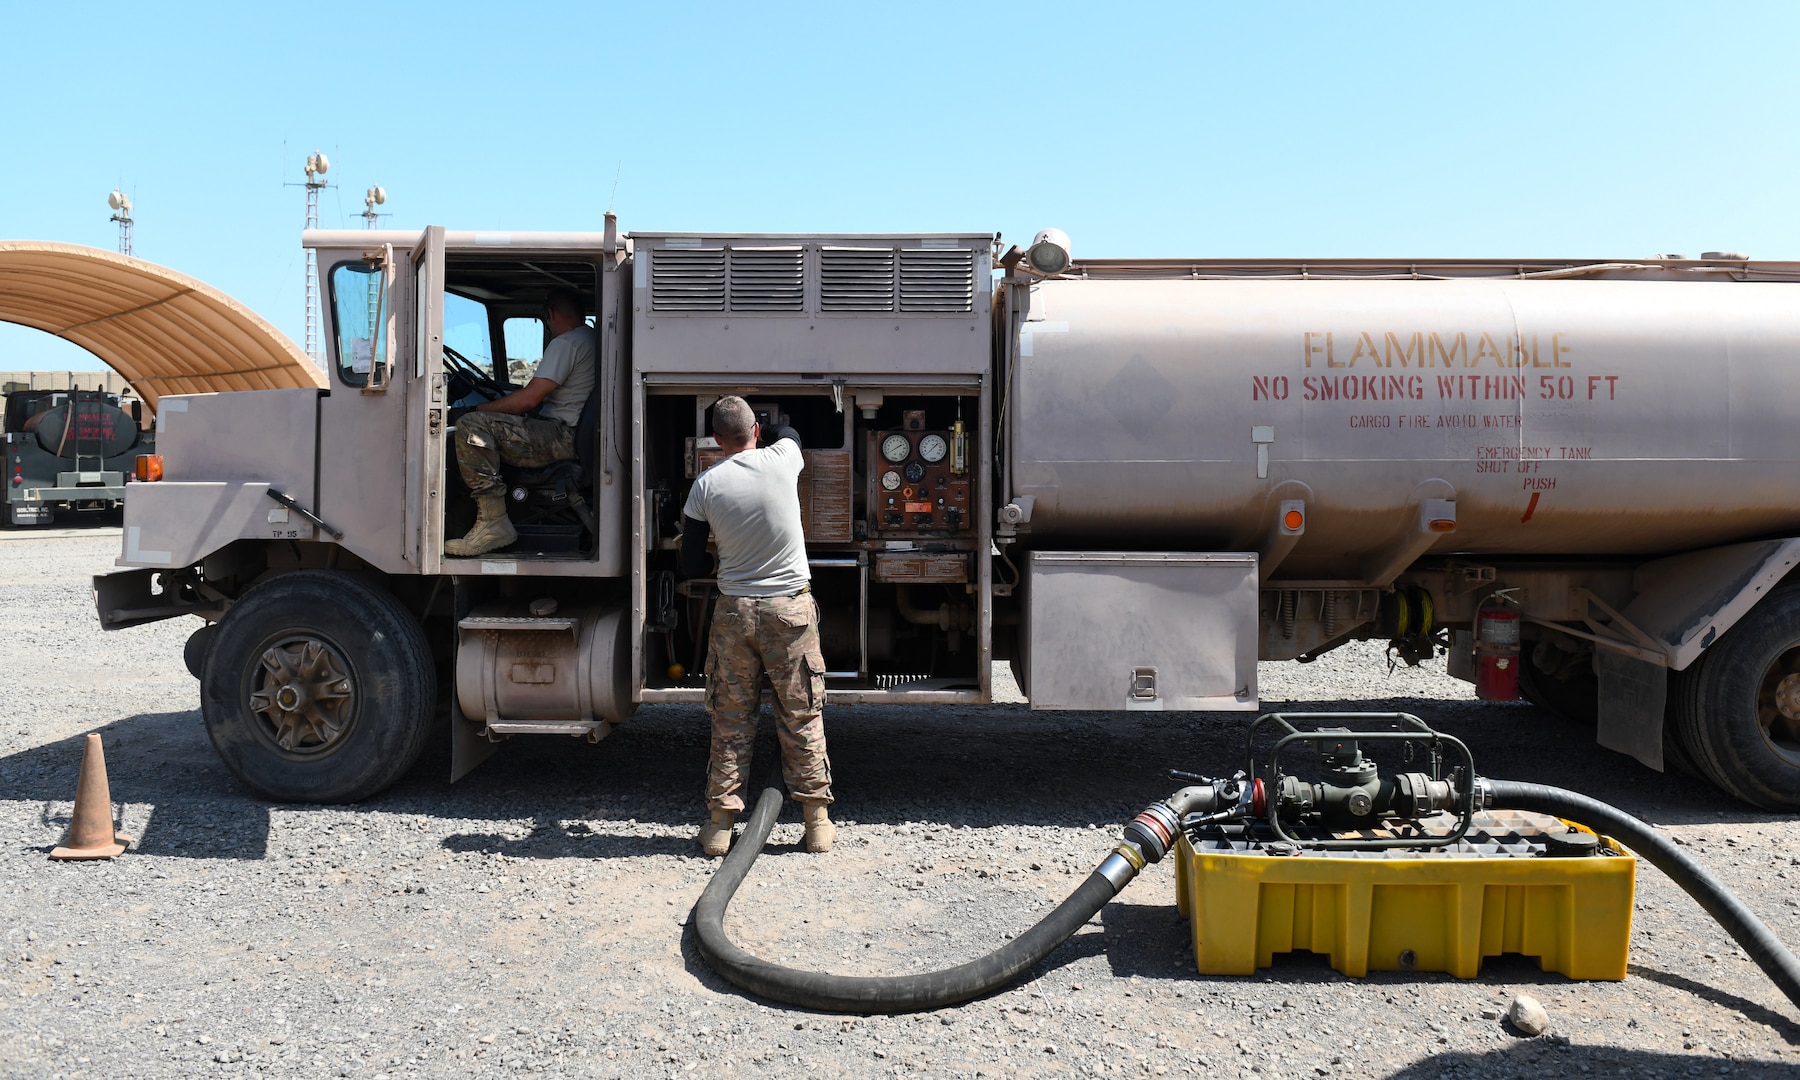 U.S. Air Force Tech. Sgt. James Hopper, left, 726th Expeditionary Air Base Squadron Vehicle Maintenance flight chief, and Staff Sgt. Jared Agey, 726th EABS Vehicle Maintenance NCO in-charge, perform a meter calibration on an R11 refueling truck at Chabelley Airfield, Djibouti, Nov. 8, 2019. Along with refuelers, the 726th EABS Vehicle Maintenance team members sustain a fleet of passenger vehicles, forklifts, ambulances, cranes and many other types of equipment. (U.S. Air Force photo by Staff Sgt. Alex Fox Echols III)